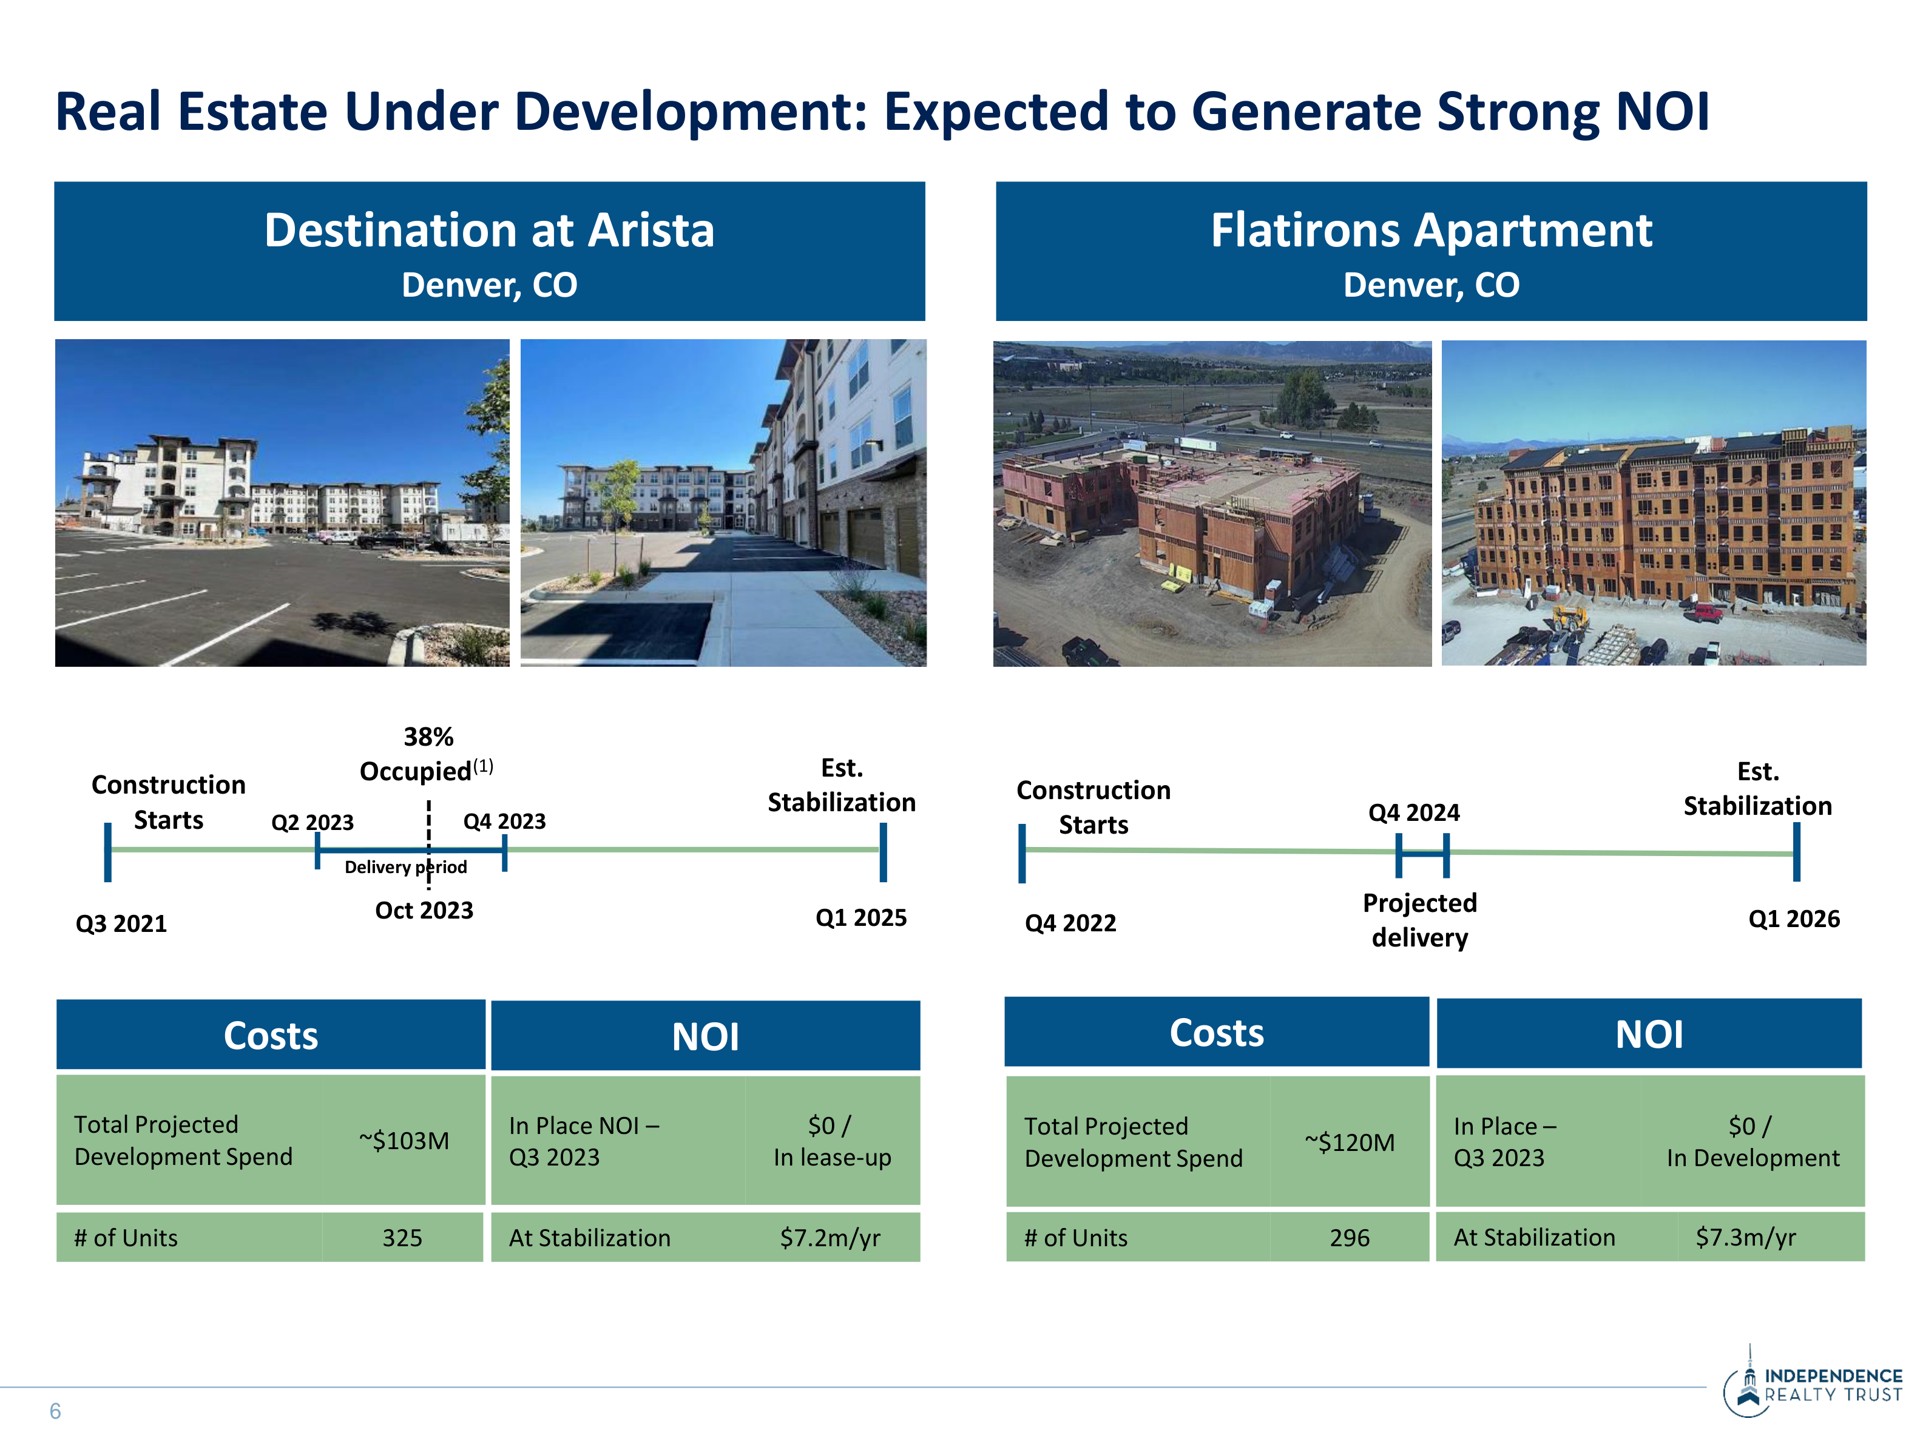 real estate under development expected to generate strong destination at arista flatirons apartment costs costs starts starts stabilization | Independence Realty Trust